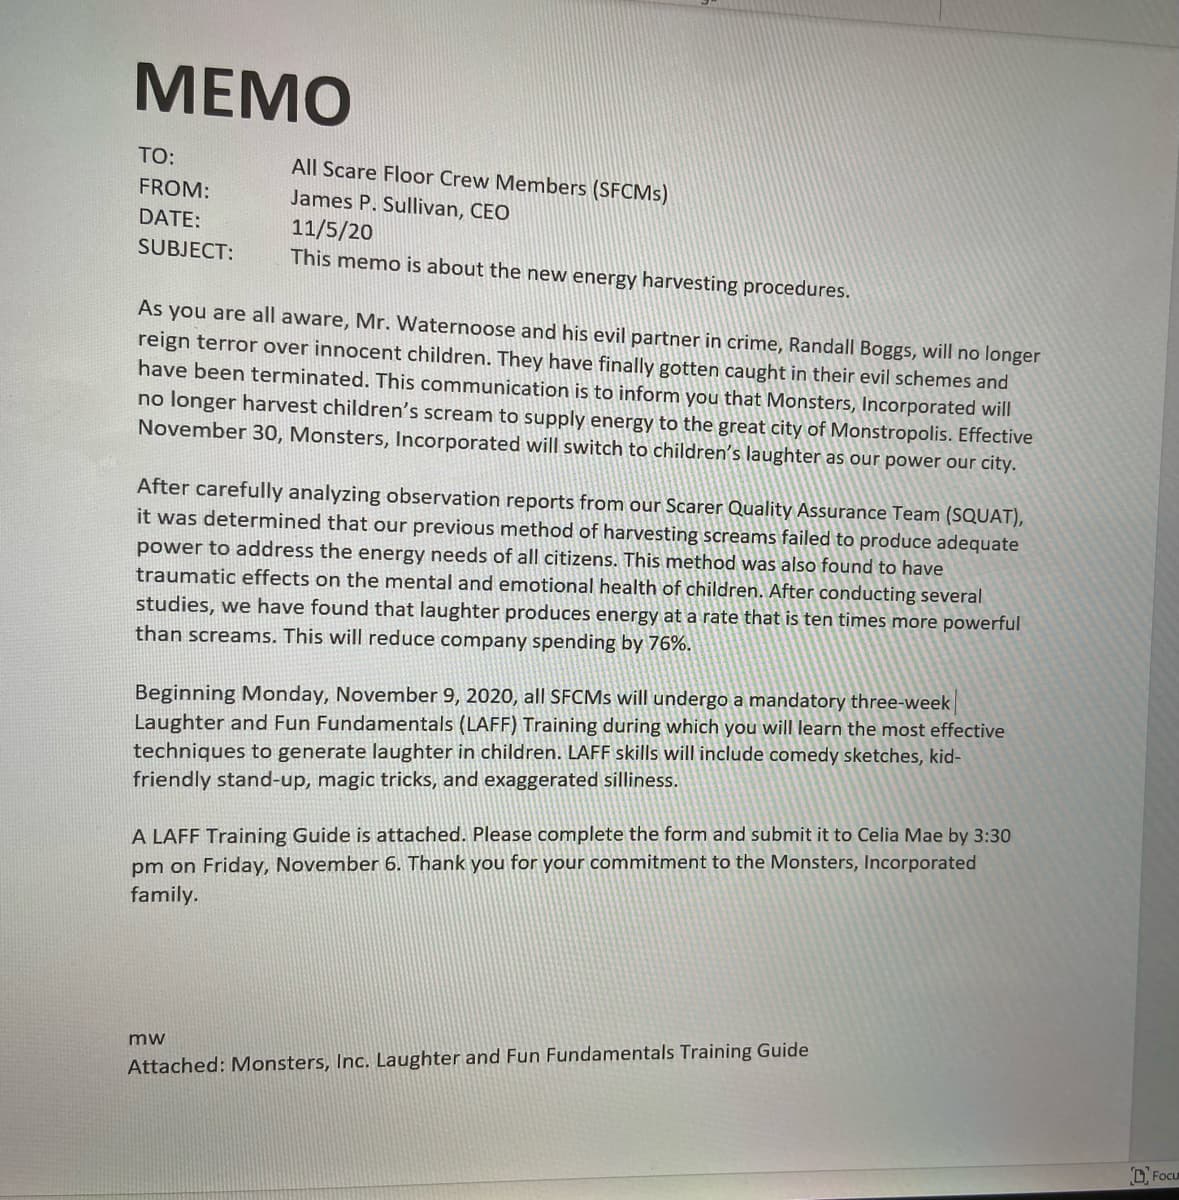 MEMO
TO:
FROM:
DATE:
SUBJECT:
All Scare Floor Crew Members (SFCMs)
James P. Sullivan, CEO
11/5/20
This memo is about the new energy harvesting procedures.
As you are all aware, Mr. Waternoose and his evil partner in crime, Randall Boggs, will no longer
reign terror over innocent children. They have finally gotten caught in their evil schemes and
have been terminated. This communication is to inform you that Monsters, Incorporated will
no longer harvest children's scream to supply energy to the great city of Monstropolis. Effective
November 30, Monsters, Incorporated will switch to children's laughter as our power our city.
After carefully analyzing observation reports from our Scarer Quality Assurance Team (SQUAT),
it was determined that our previous method of harvesting screams failed to produce adequate
power to address the energy needs of all citizens. This method was also found to have
traumatic effects on the mental and emotional health of children. After conducting several
studies, we have found that laughter produces energy at a rate that is ten times more powerful
than screams. This will reduce company spending by 76%.
Beginning Monday, November 9, 2020, all SFCMs will undergo a mandatory three-week
Laughter and Fun Fundamentals (LAFF) Training during which you will learn the most effective
techniques to generate laughter in children. LAFF skills will include comedy sketches, kid-
friendly stand-up, magic tricks, and exaggerated silliness.
A LAFF Training Guide is attached. Please complete the form and submit it to Celia Mae by 3:30
pm on Friday, November 6. Thank you for your commitment to the Monsters, Incorporated
family.
mw
Attached: Monsters, Inc. Laughter and Fun Fundamentals Training Guide
Focu